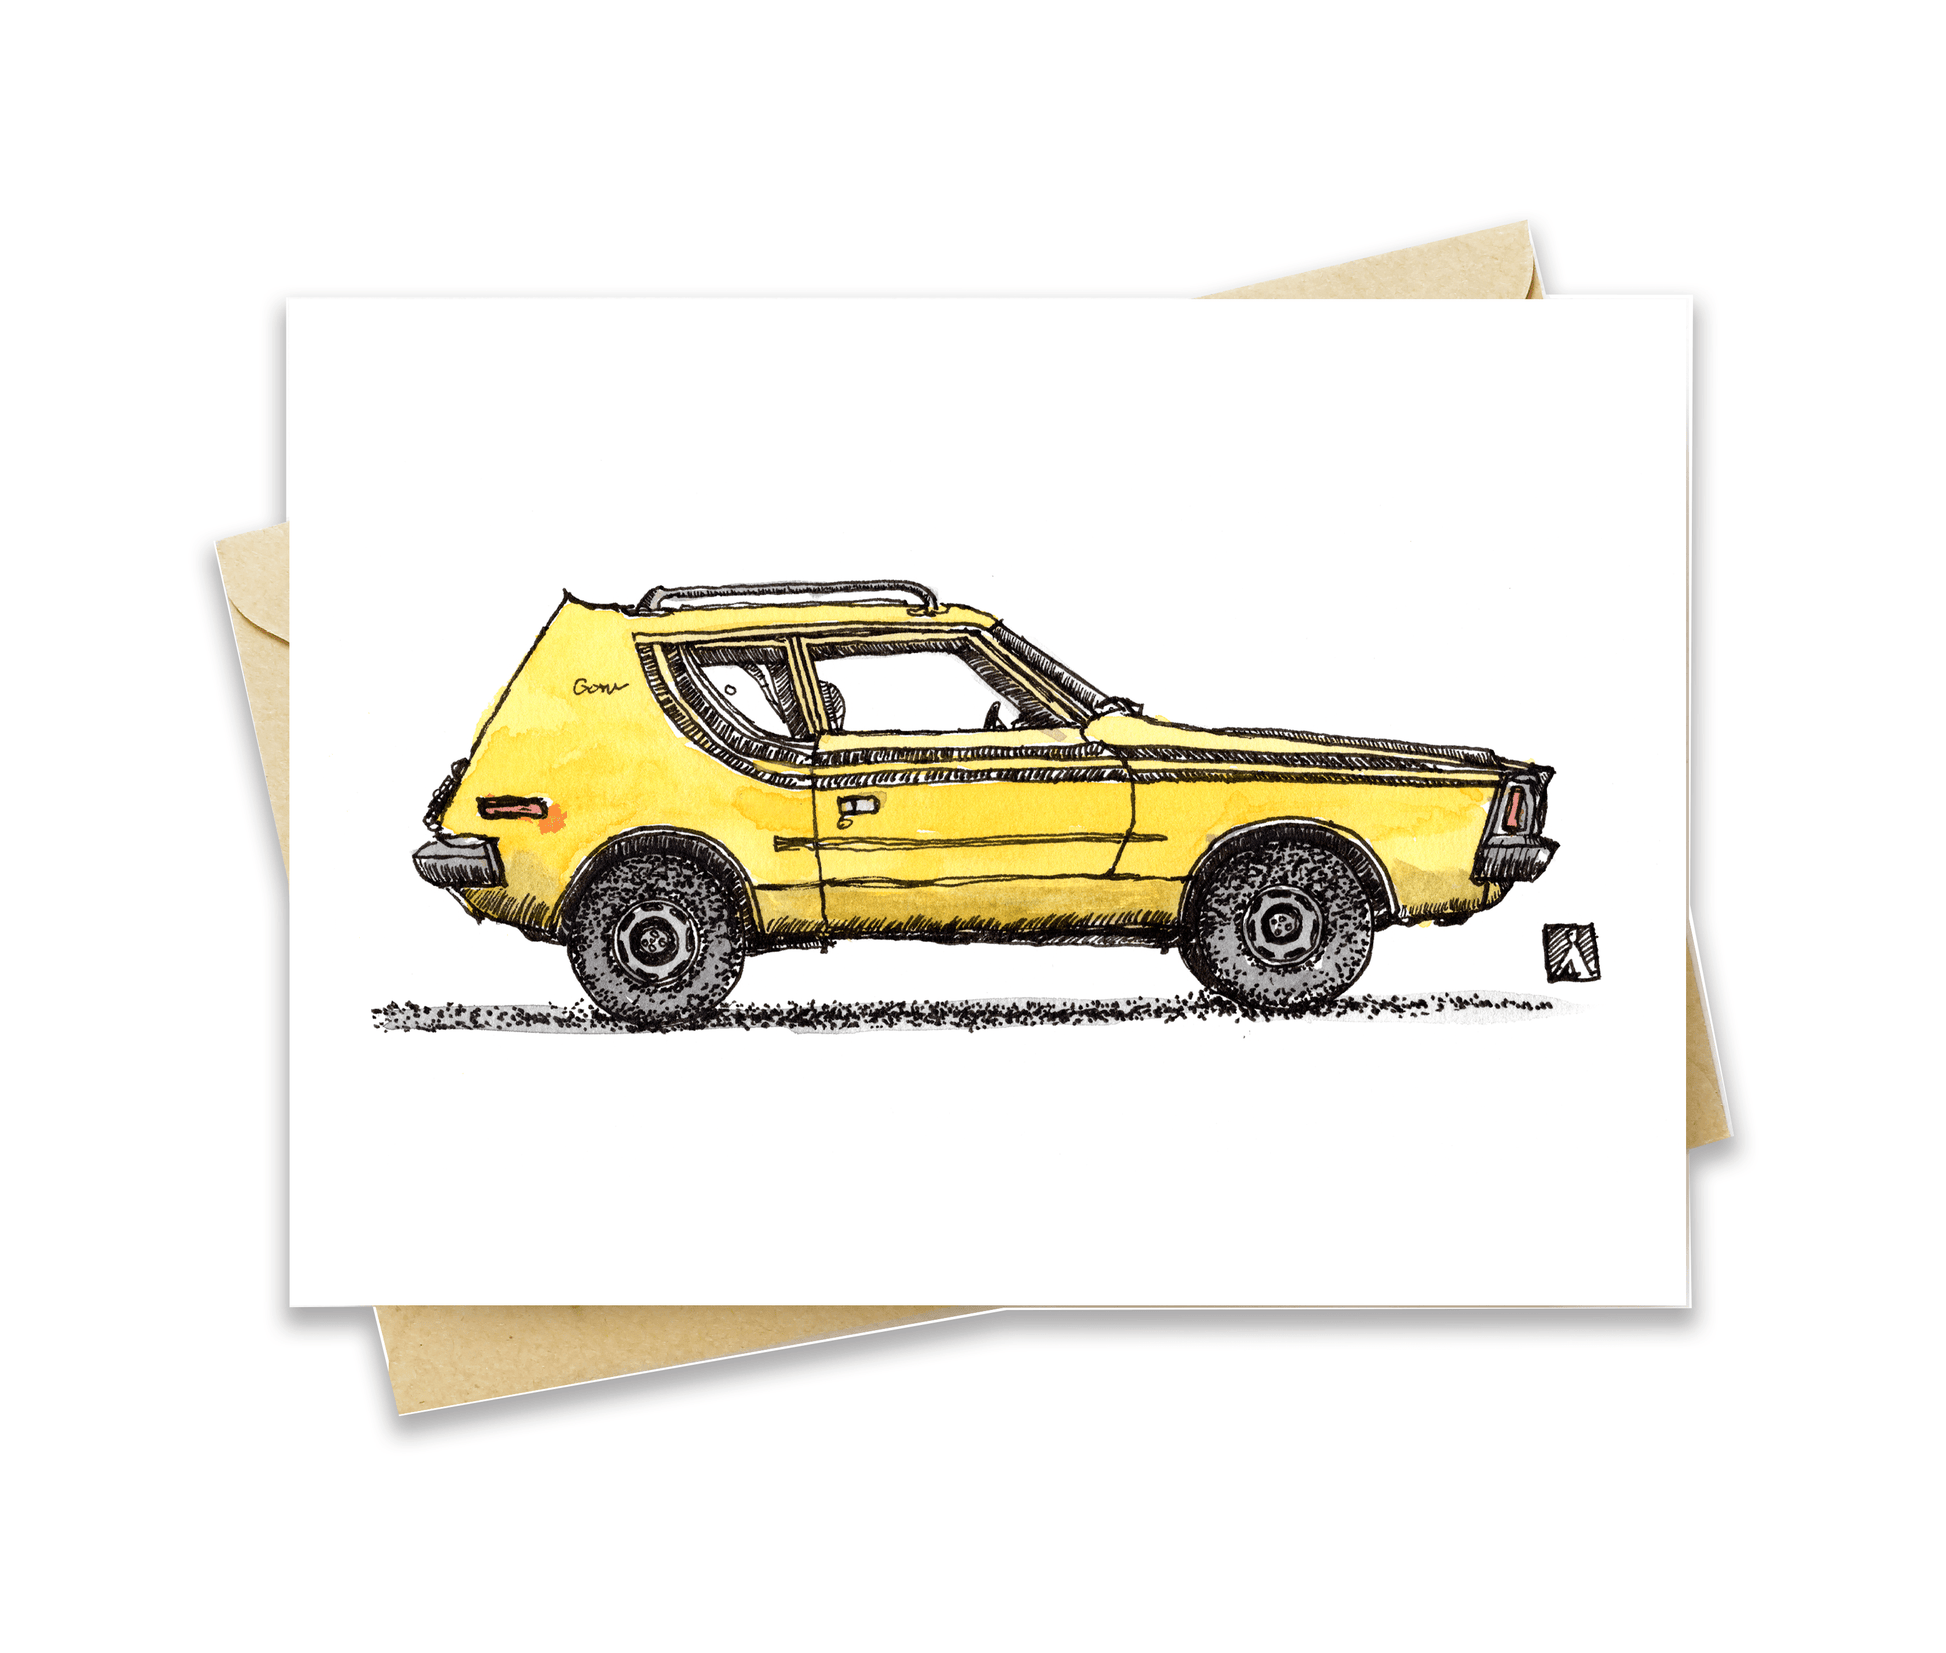 BellavanceInk: Greeting Card With A Pen & Ink Watercolor Drawing Of A Vintage AMC Gremlin 5 x 7 Inches - BellavanceInk